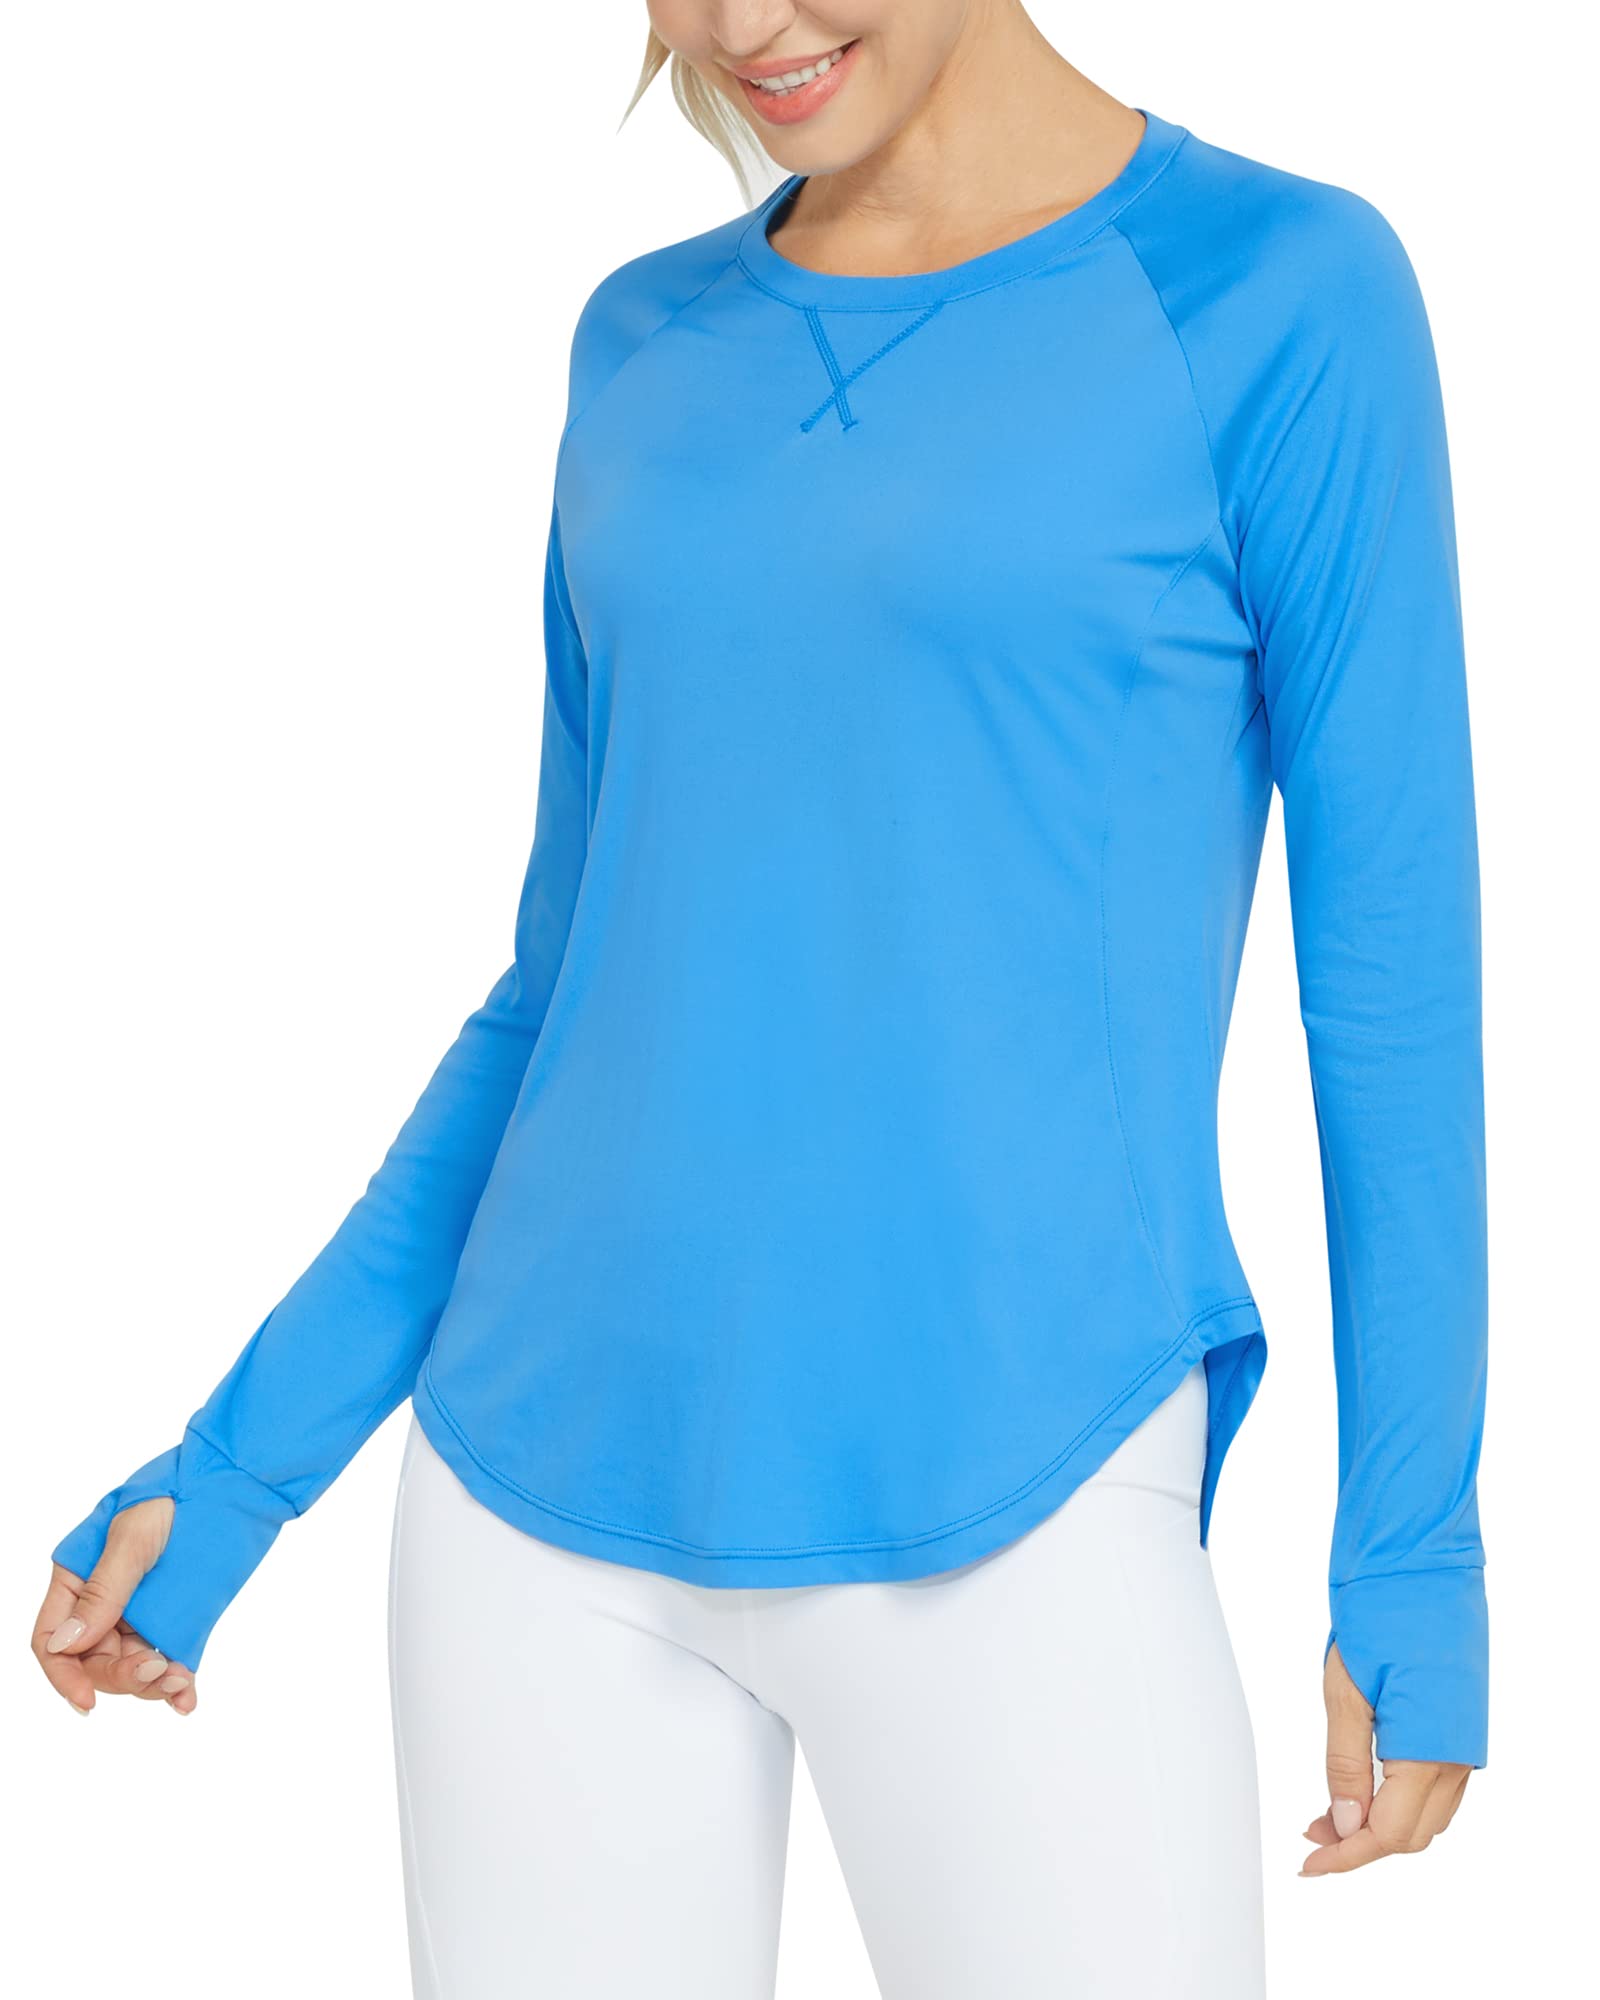 3 Pack Long Sleeve Workout Tops for Women, UPF 50+ Sun Protection